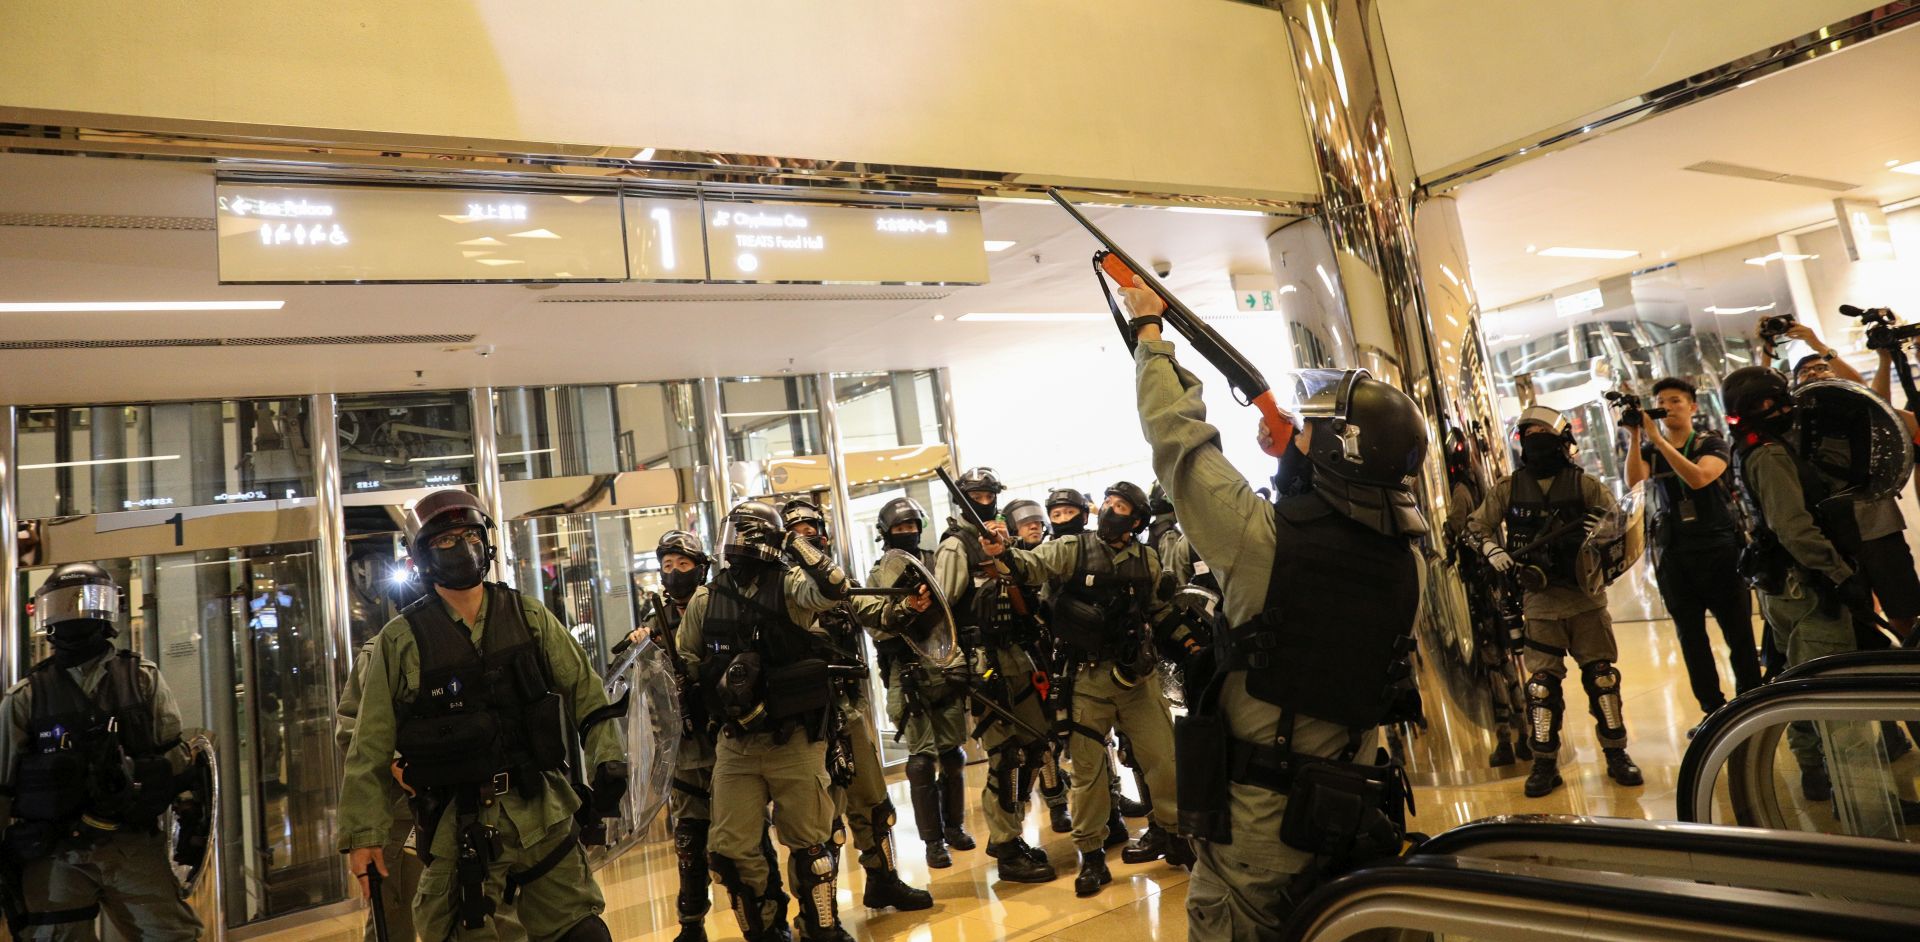 epa07969316 Riot police arrive to a shopping mall to disperse protesters during a rally against police brutality in Hong Kong, China, 03 November 2019. Hong Kong has entered a 22nd week of ongoing mass protests, originally triggered by a now withdrawn extradition bill to mainland China that have turned into a wider pro-democracy movement.  EPA/JEROME FAVRE